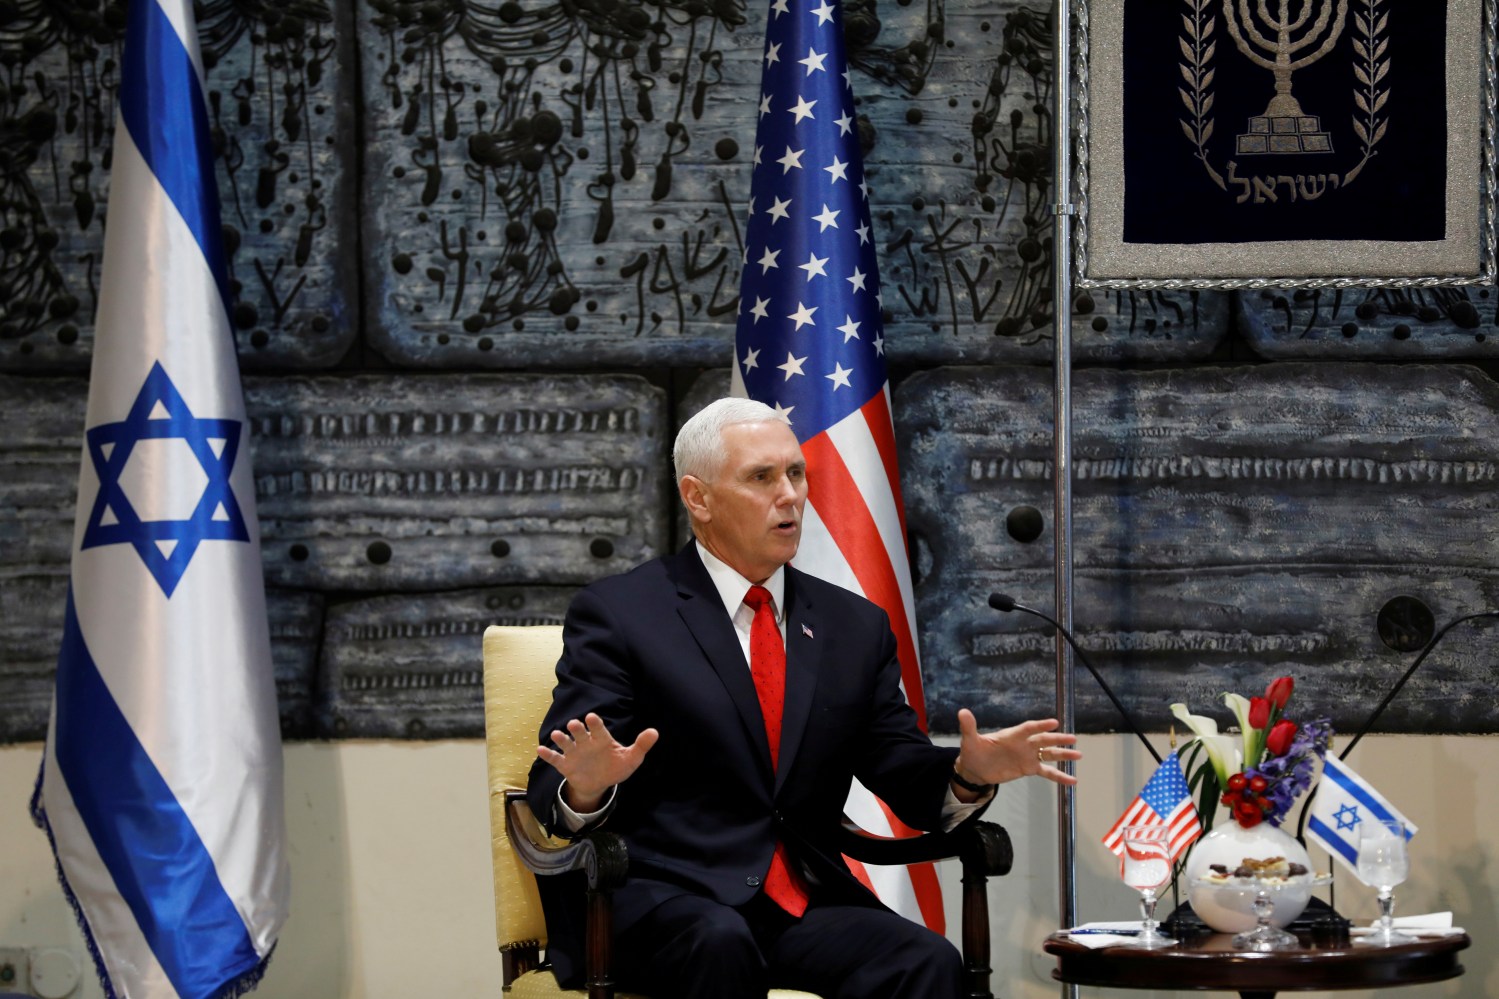 U.S. Vice President Mike Pence speaks during a meeting at Israeli President Reuven Rivlin's residence in Jerusalem January 23, 2018. REUTERS/Ronen Zvulun - RC1F5FED8AF0